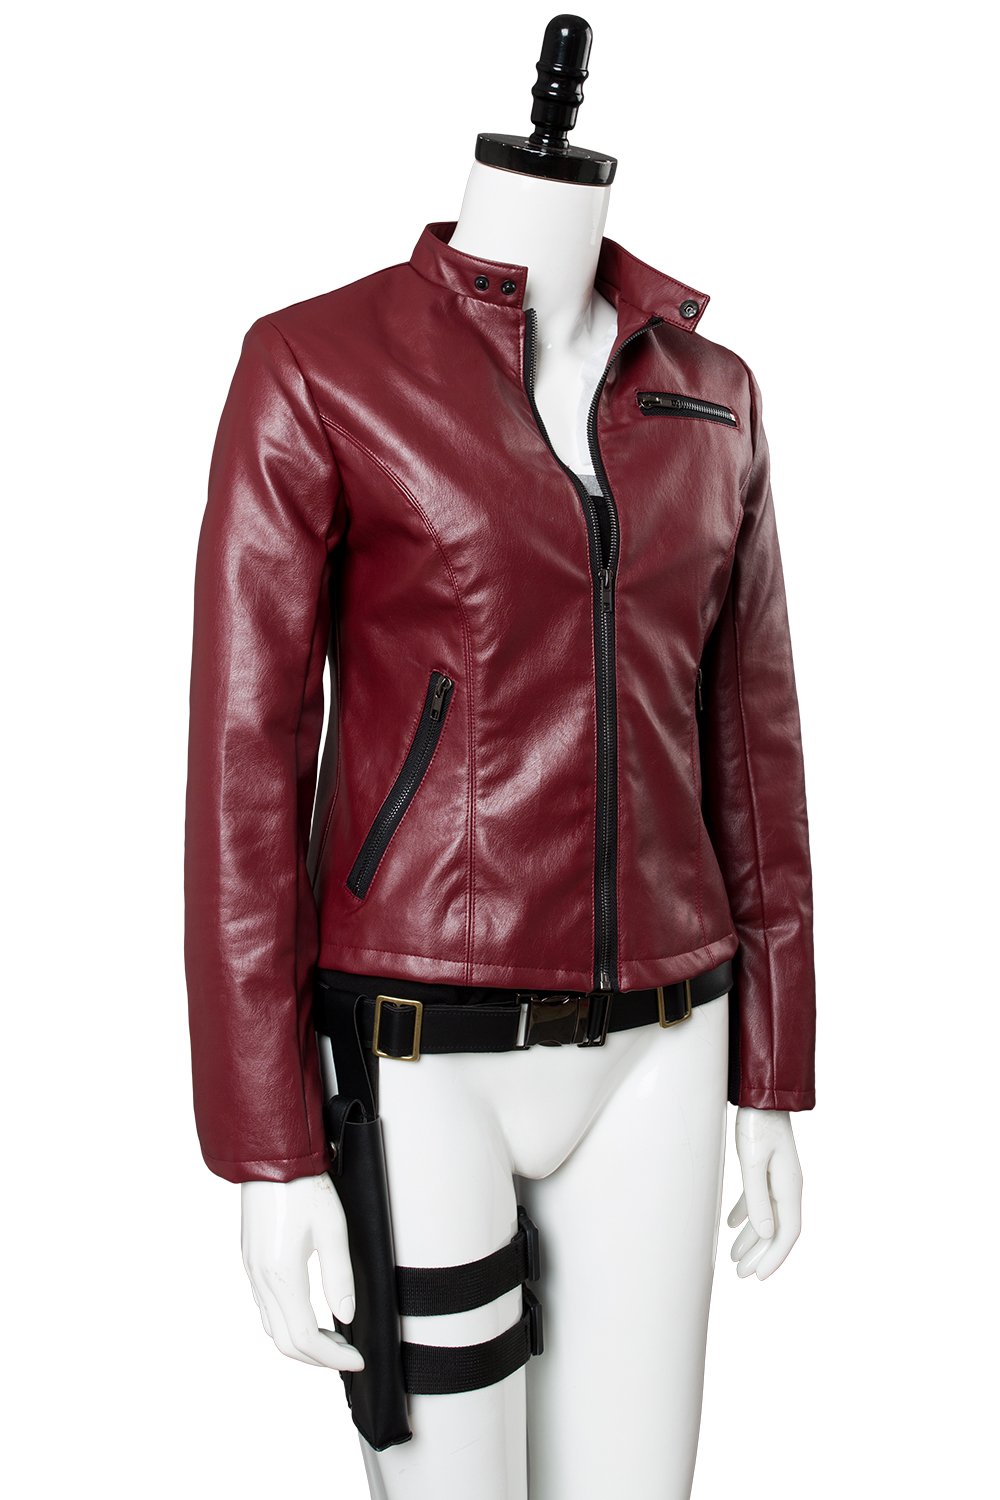 Video Game Resident Evil 2 Remake Claire Redfield Outfit Cosplay Costume